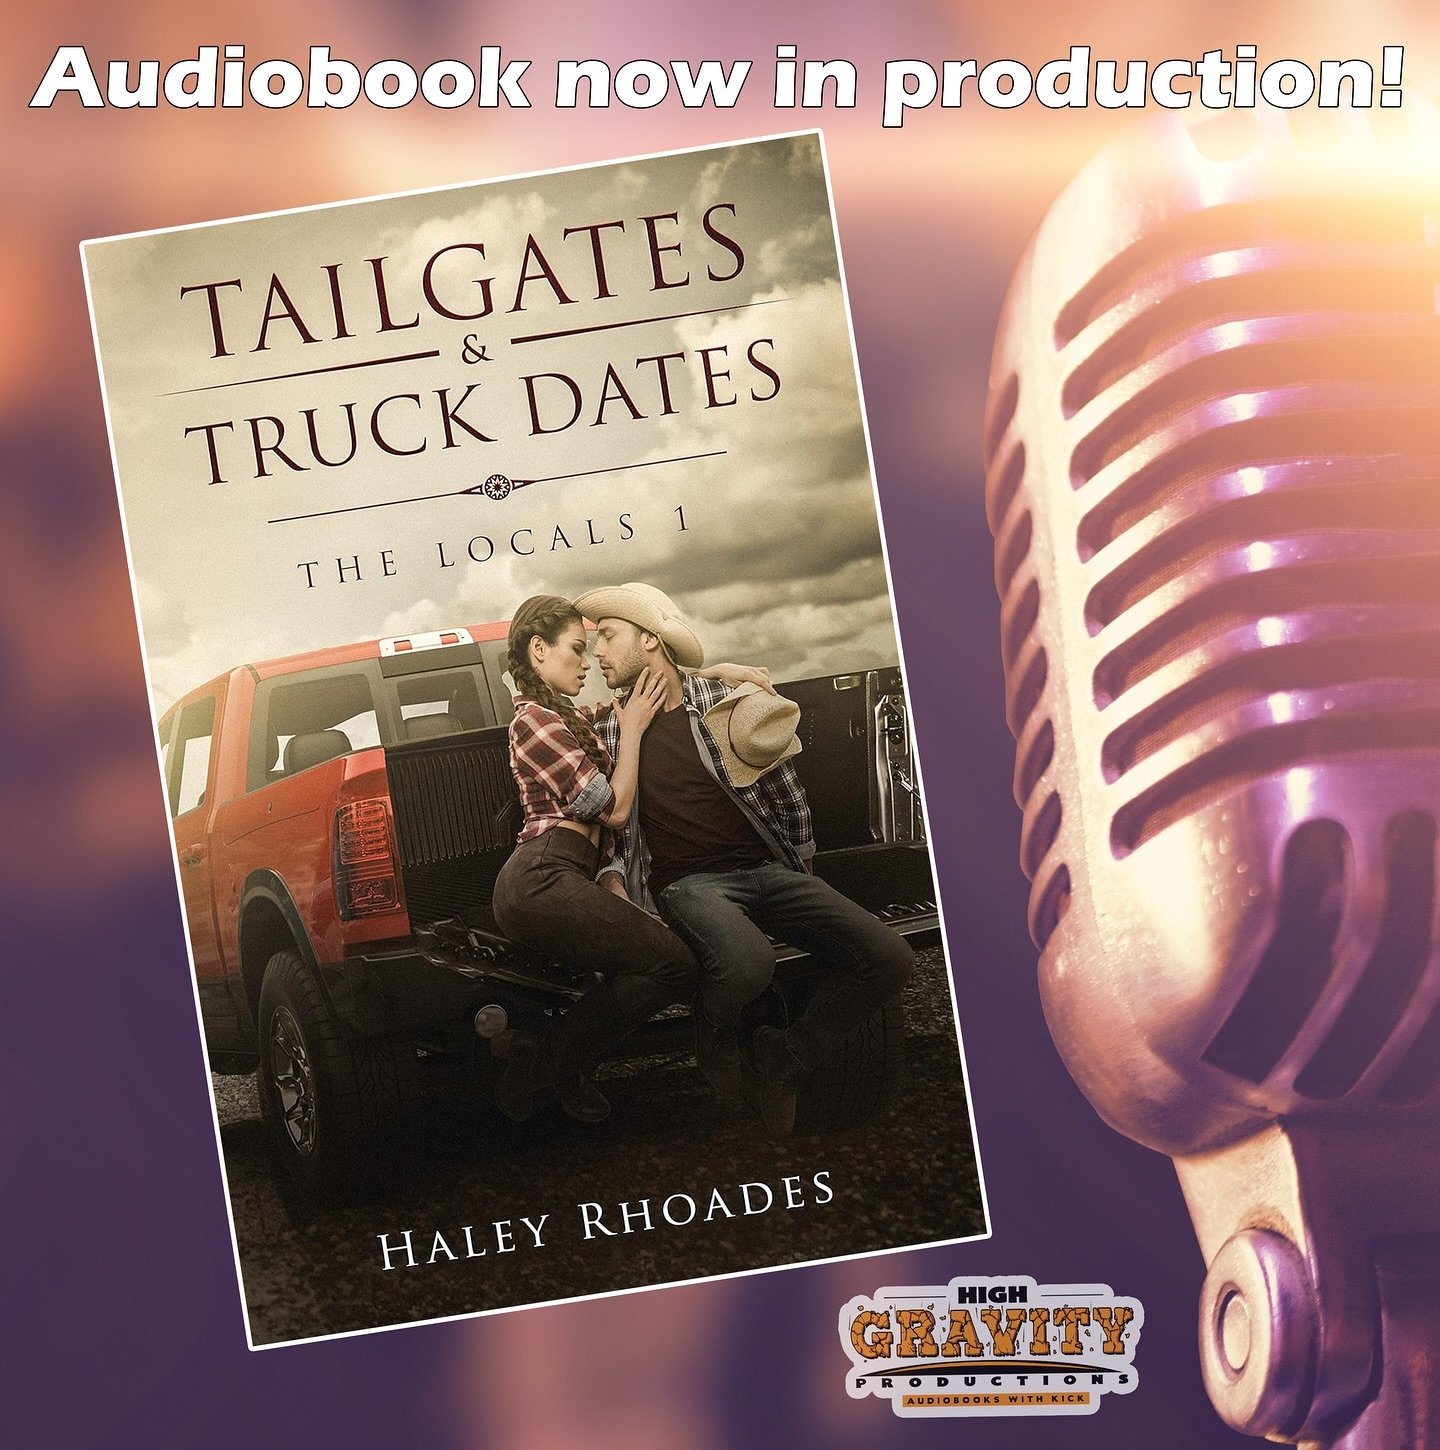 A Small-Town, Second Chance Romance now in production! Tailgates and Truck Dates, The Locals, Book 1 by @haleyrhoadesauthor This title will be narrated by @allie.martina.narrator and will be available in audio this June!